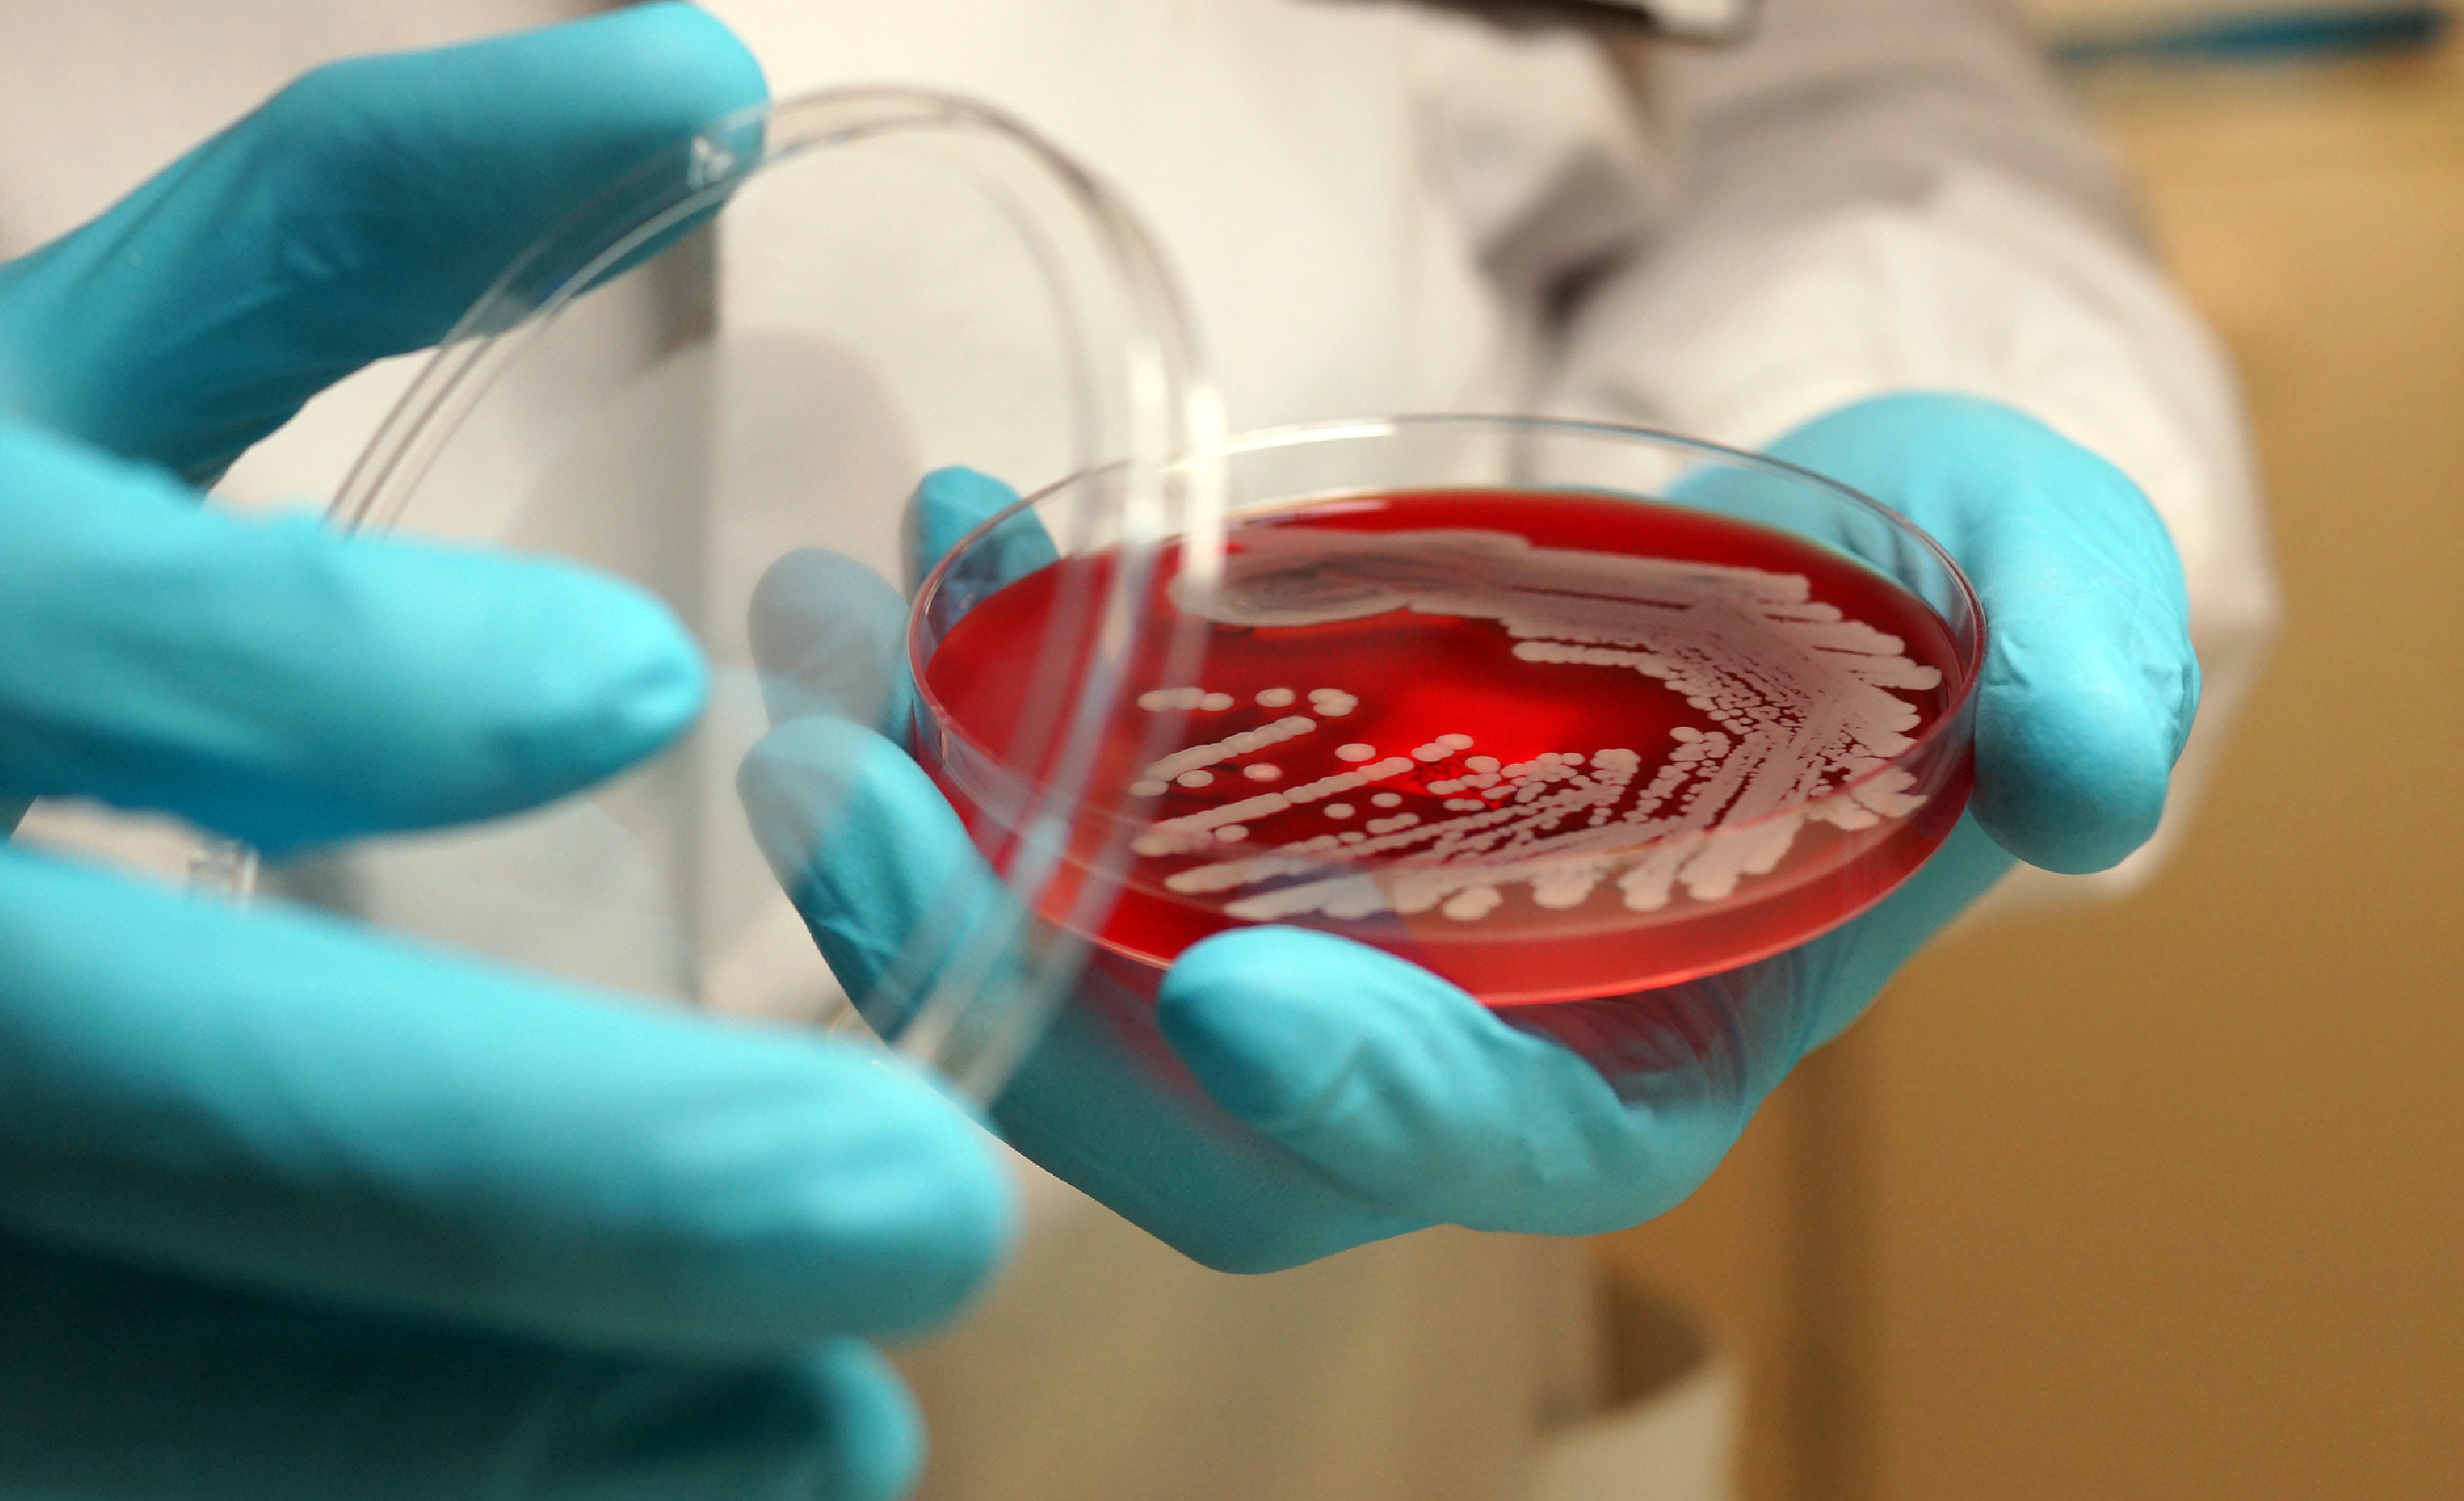 Close up of a bacterial culture in red agar, held by blue gloved hands wearing a white coat